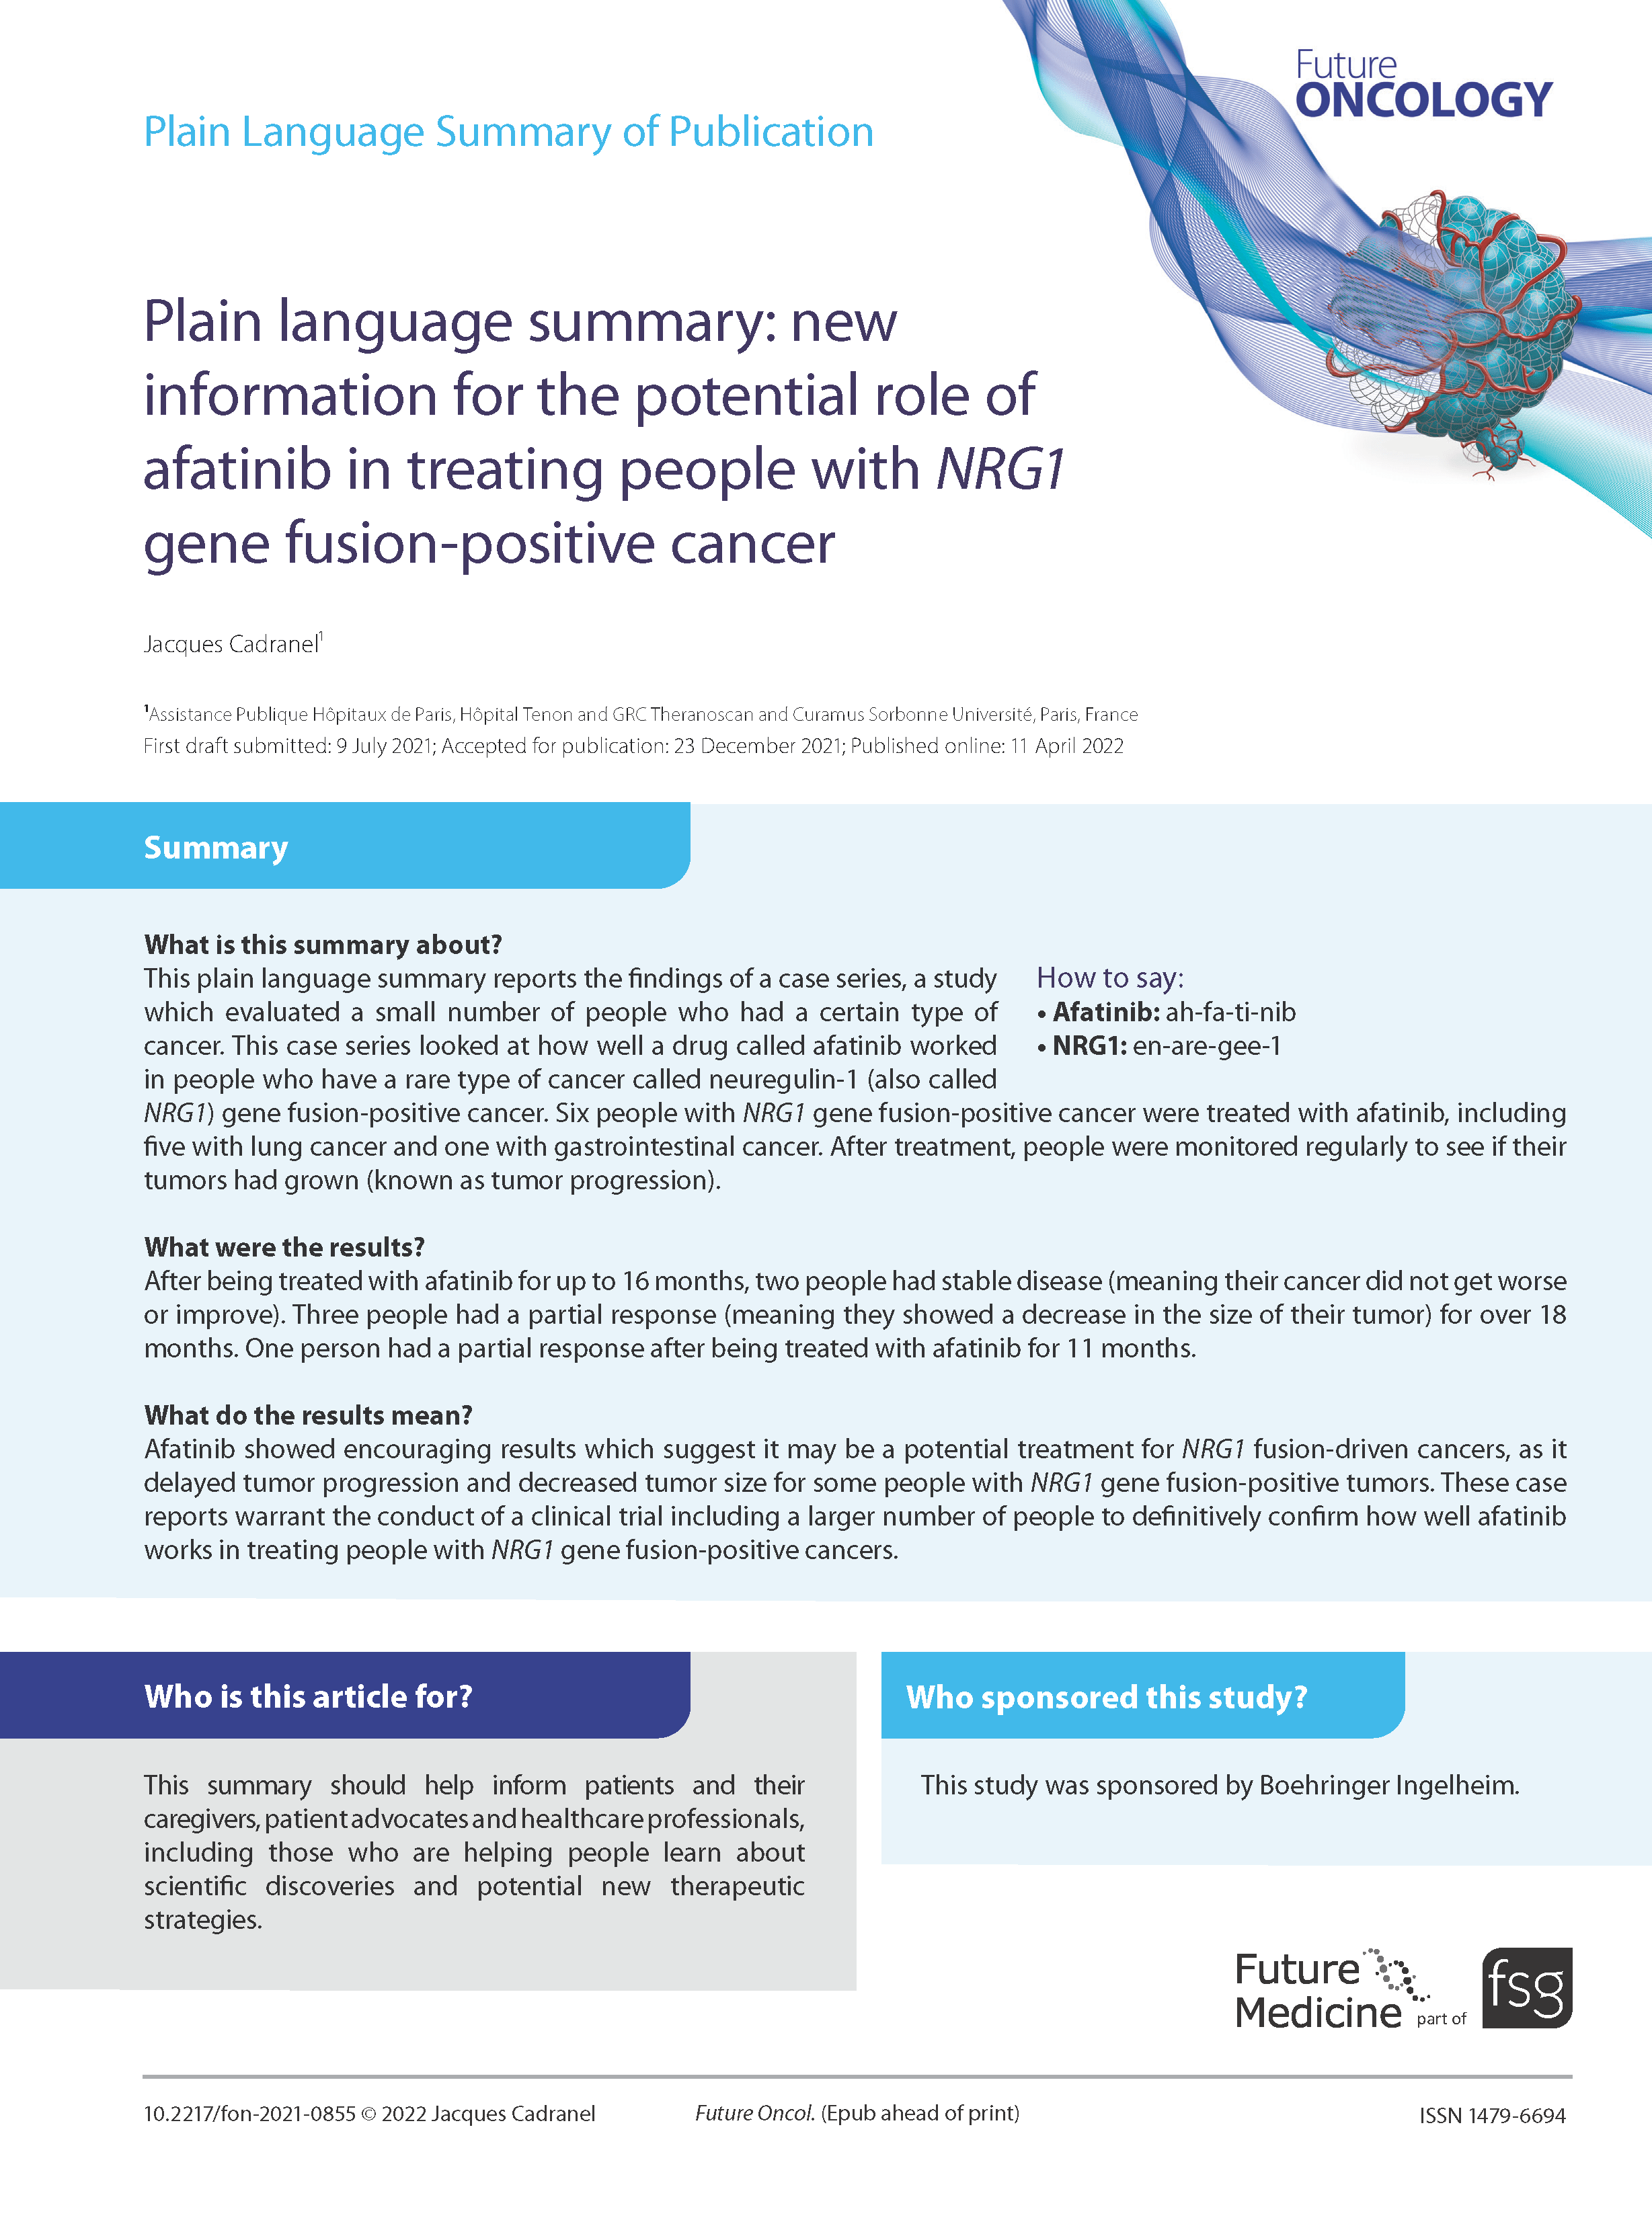 Plain language summary of publication: new information for the potential role of afatinib in treating people with NRG1 gene fusion-positive cancer